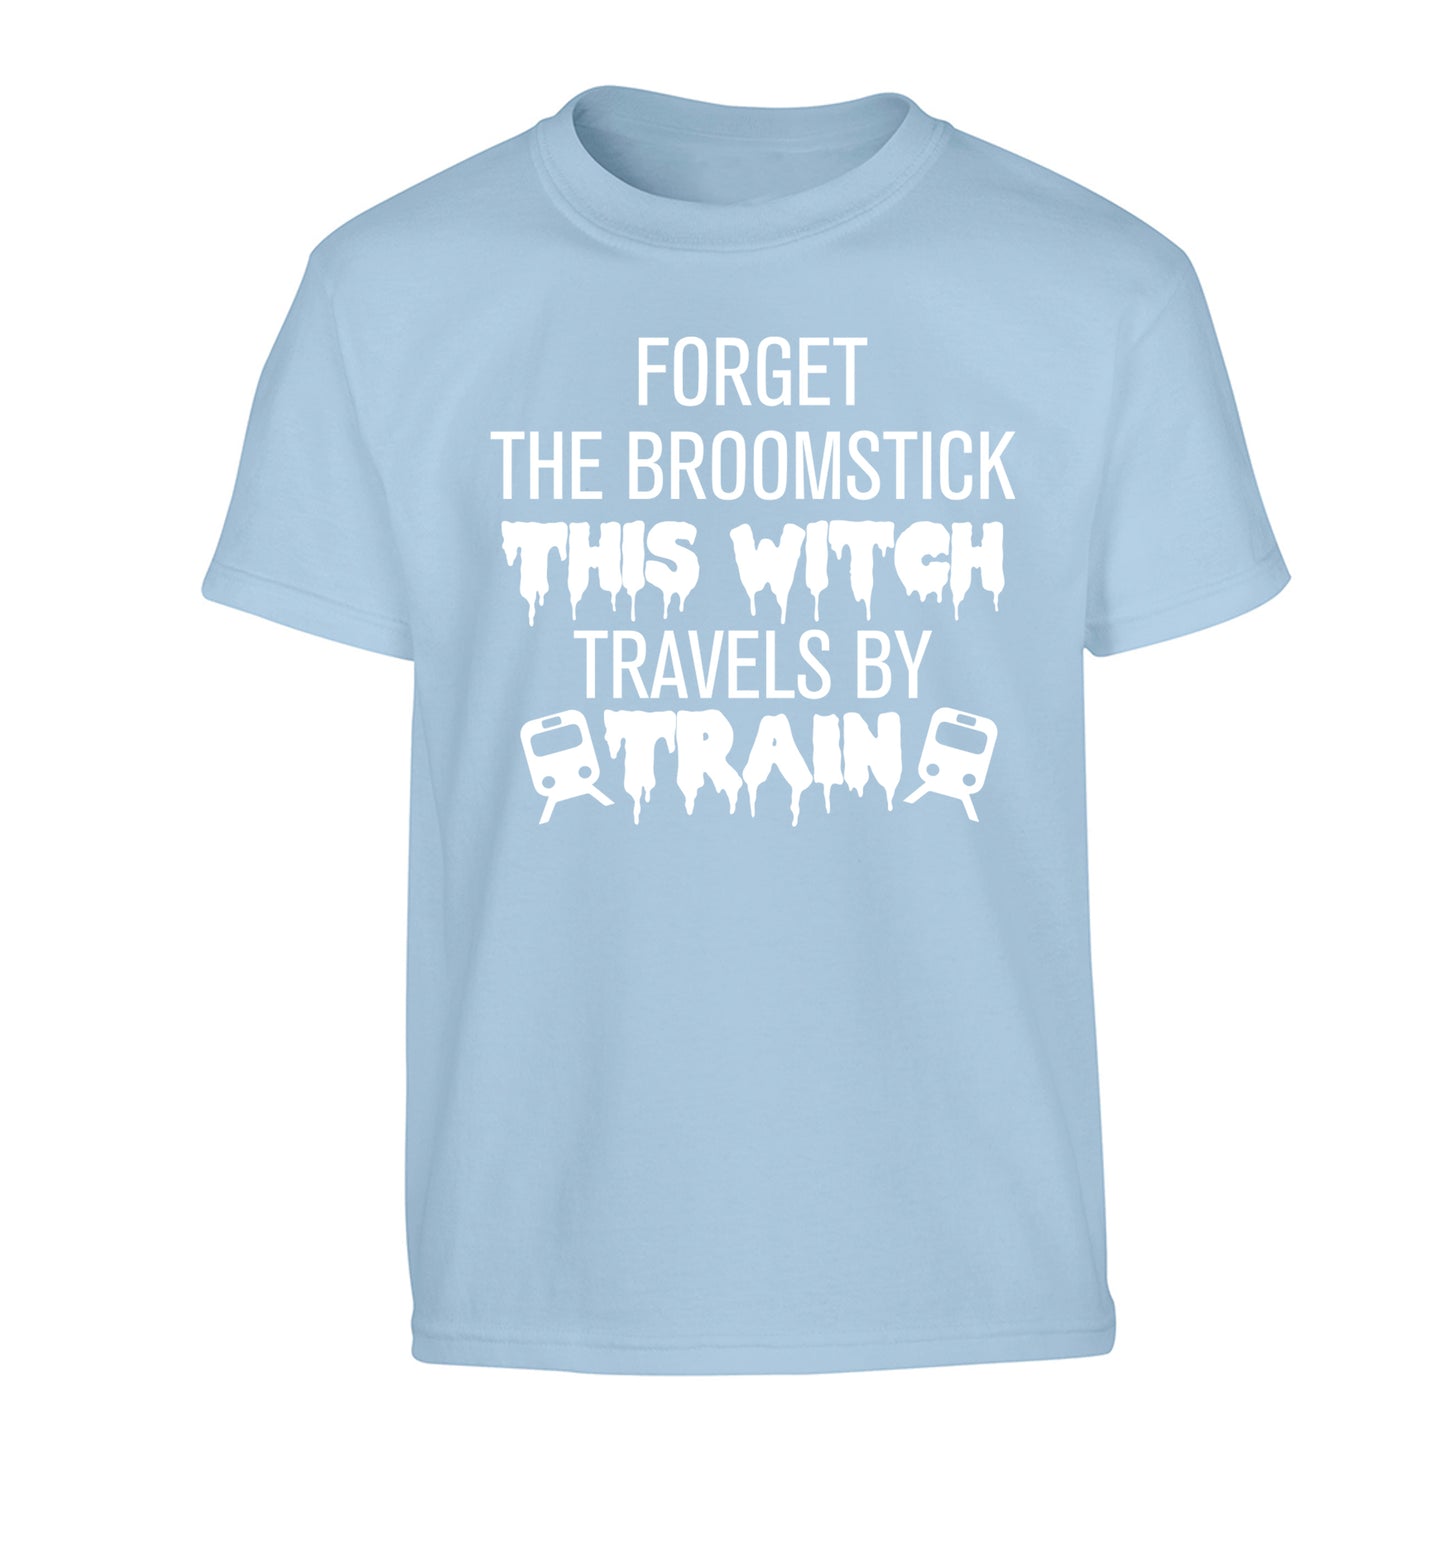 Forget the broomstick this witch travels by train Children's light blue Tshirt 12-14 Years